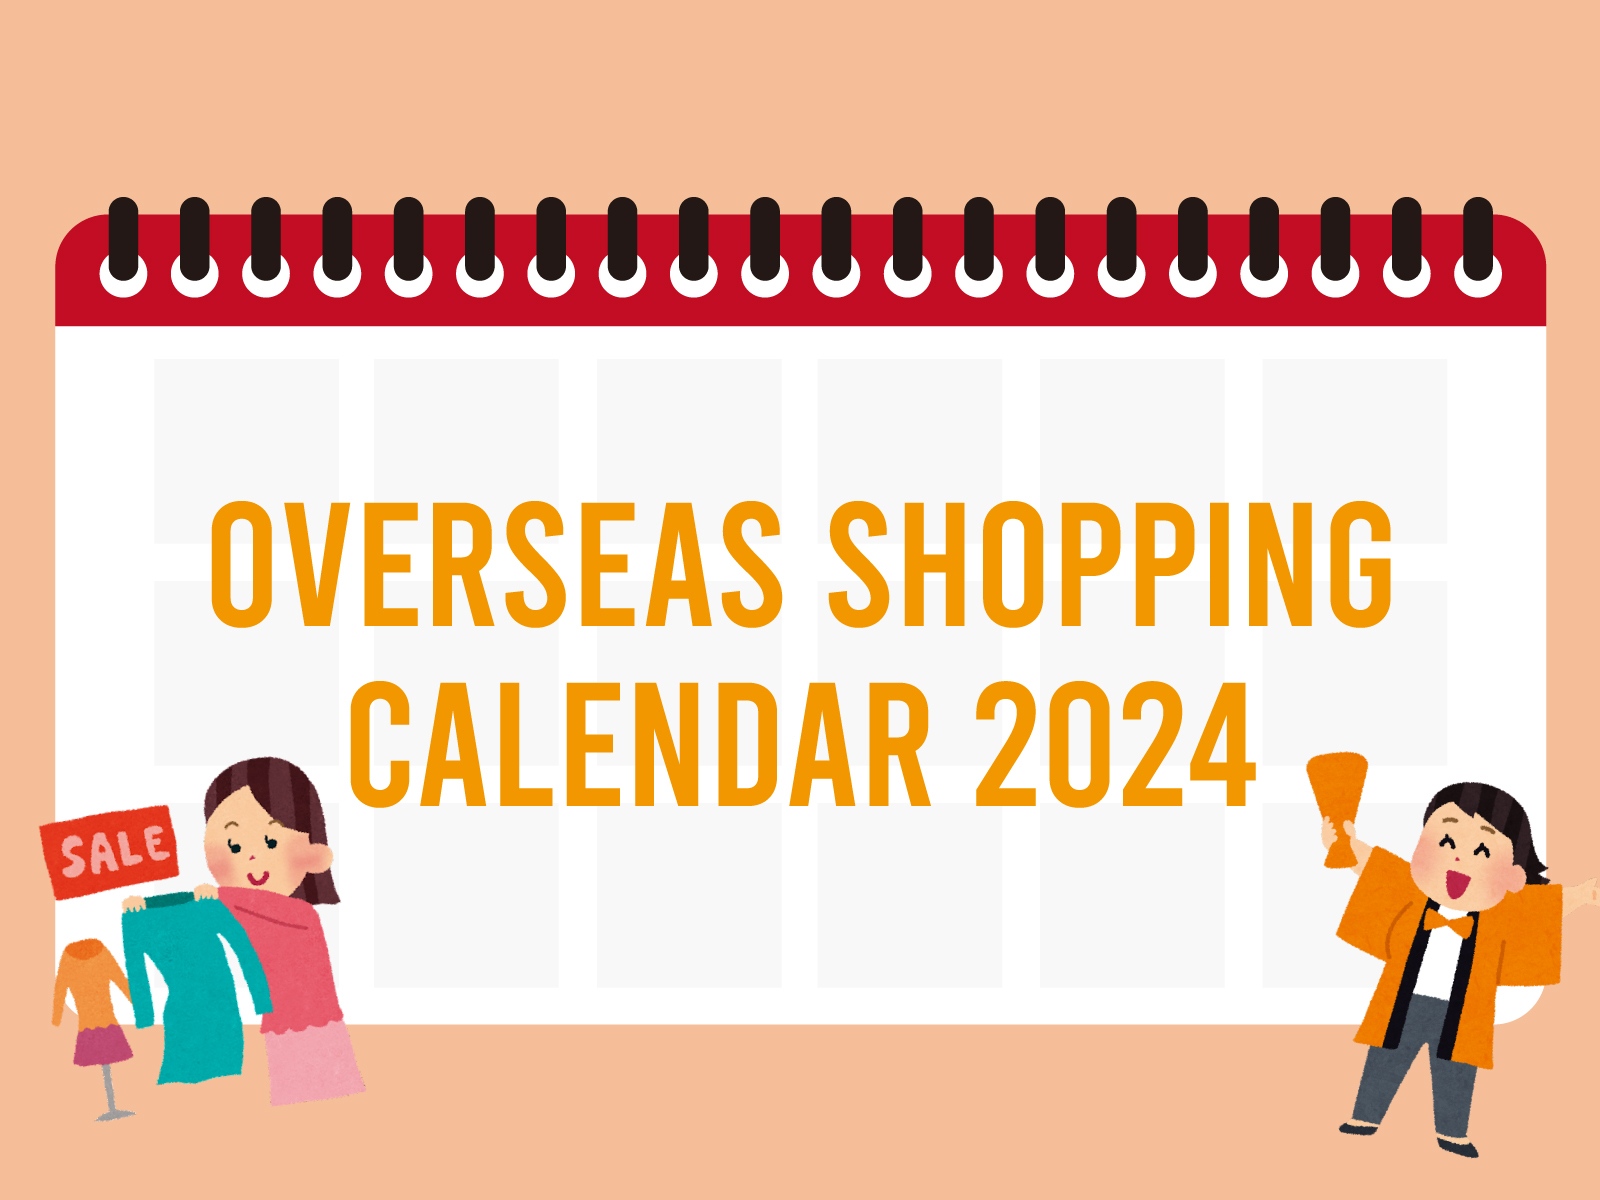 Shopping Calendar 2024 Major Sales Events to Shop This Year